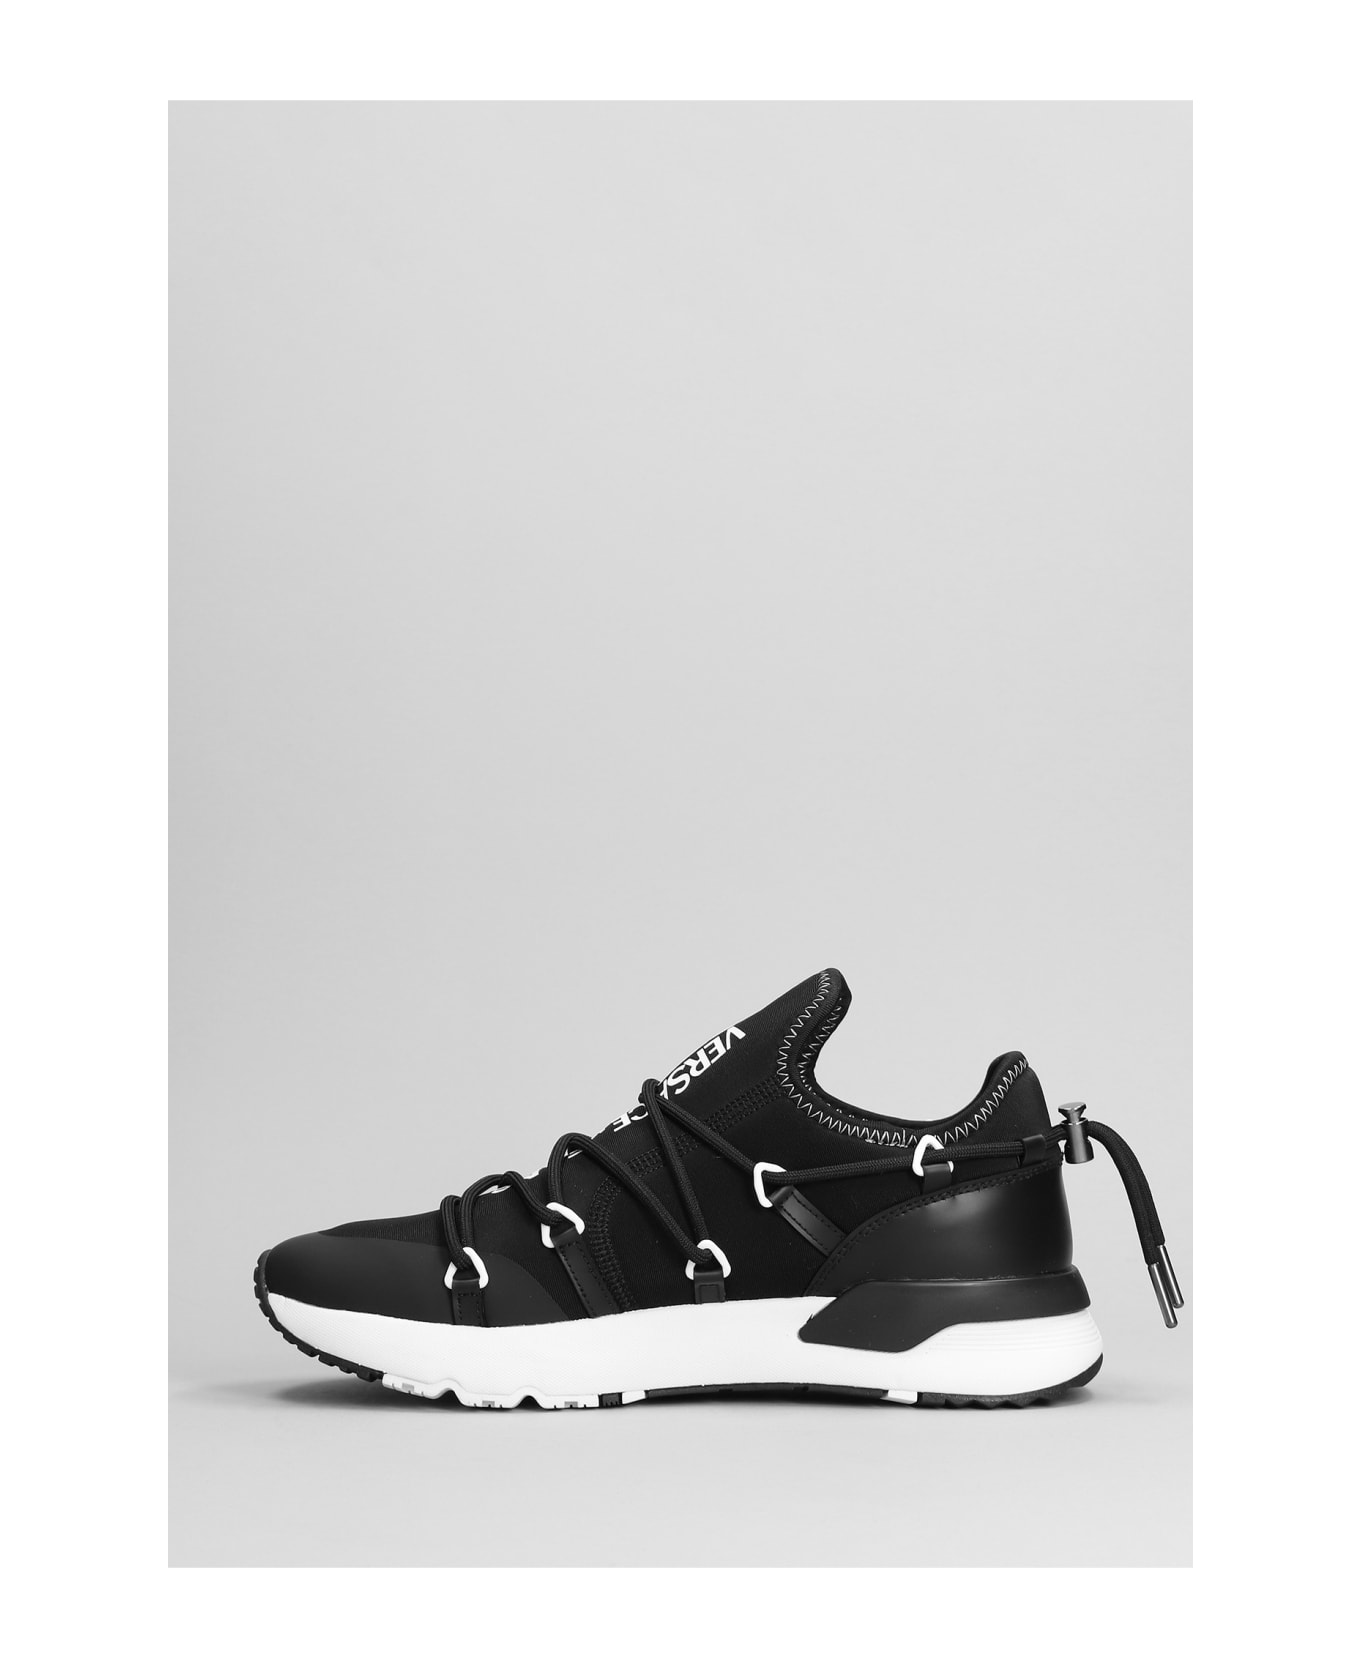 Versace Jeans Couture Sneakers - BLACK/WHITE